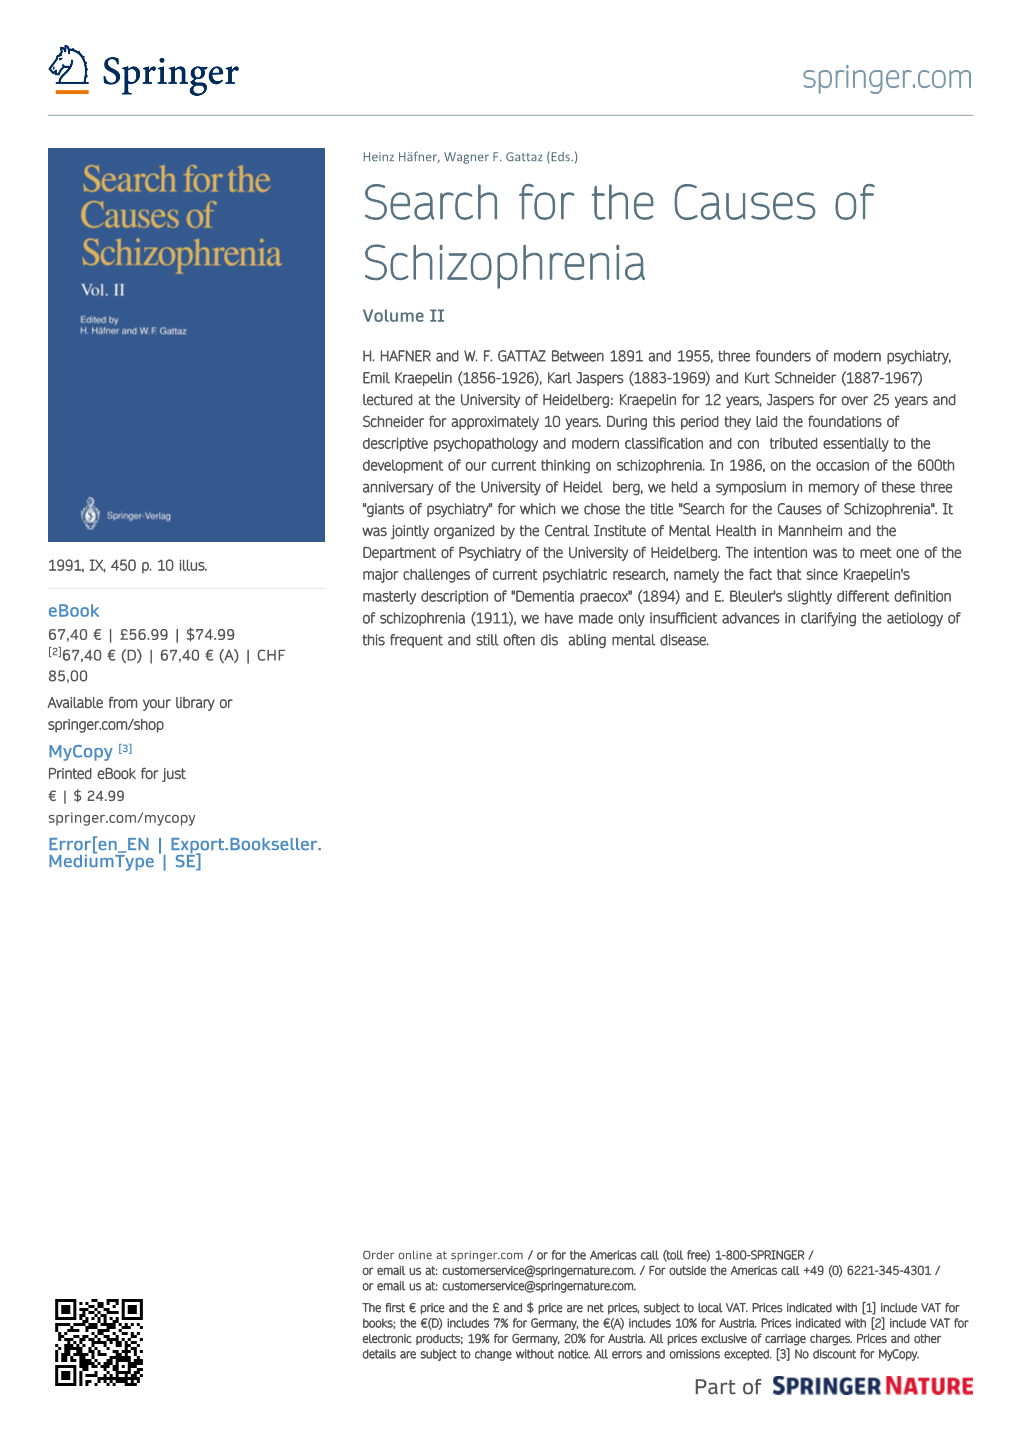 Search for the Causes of Schizophrenia Volume II